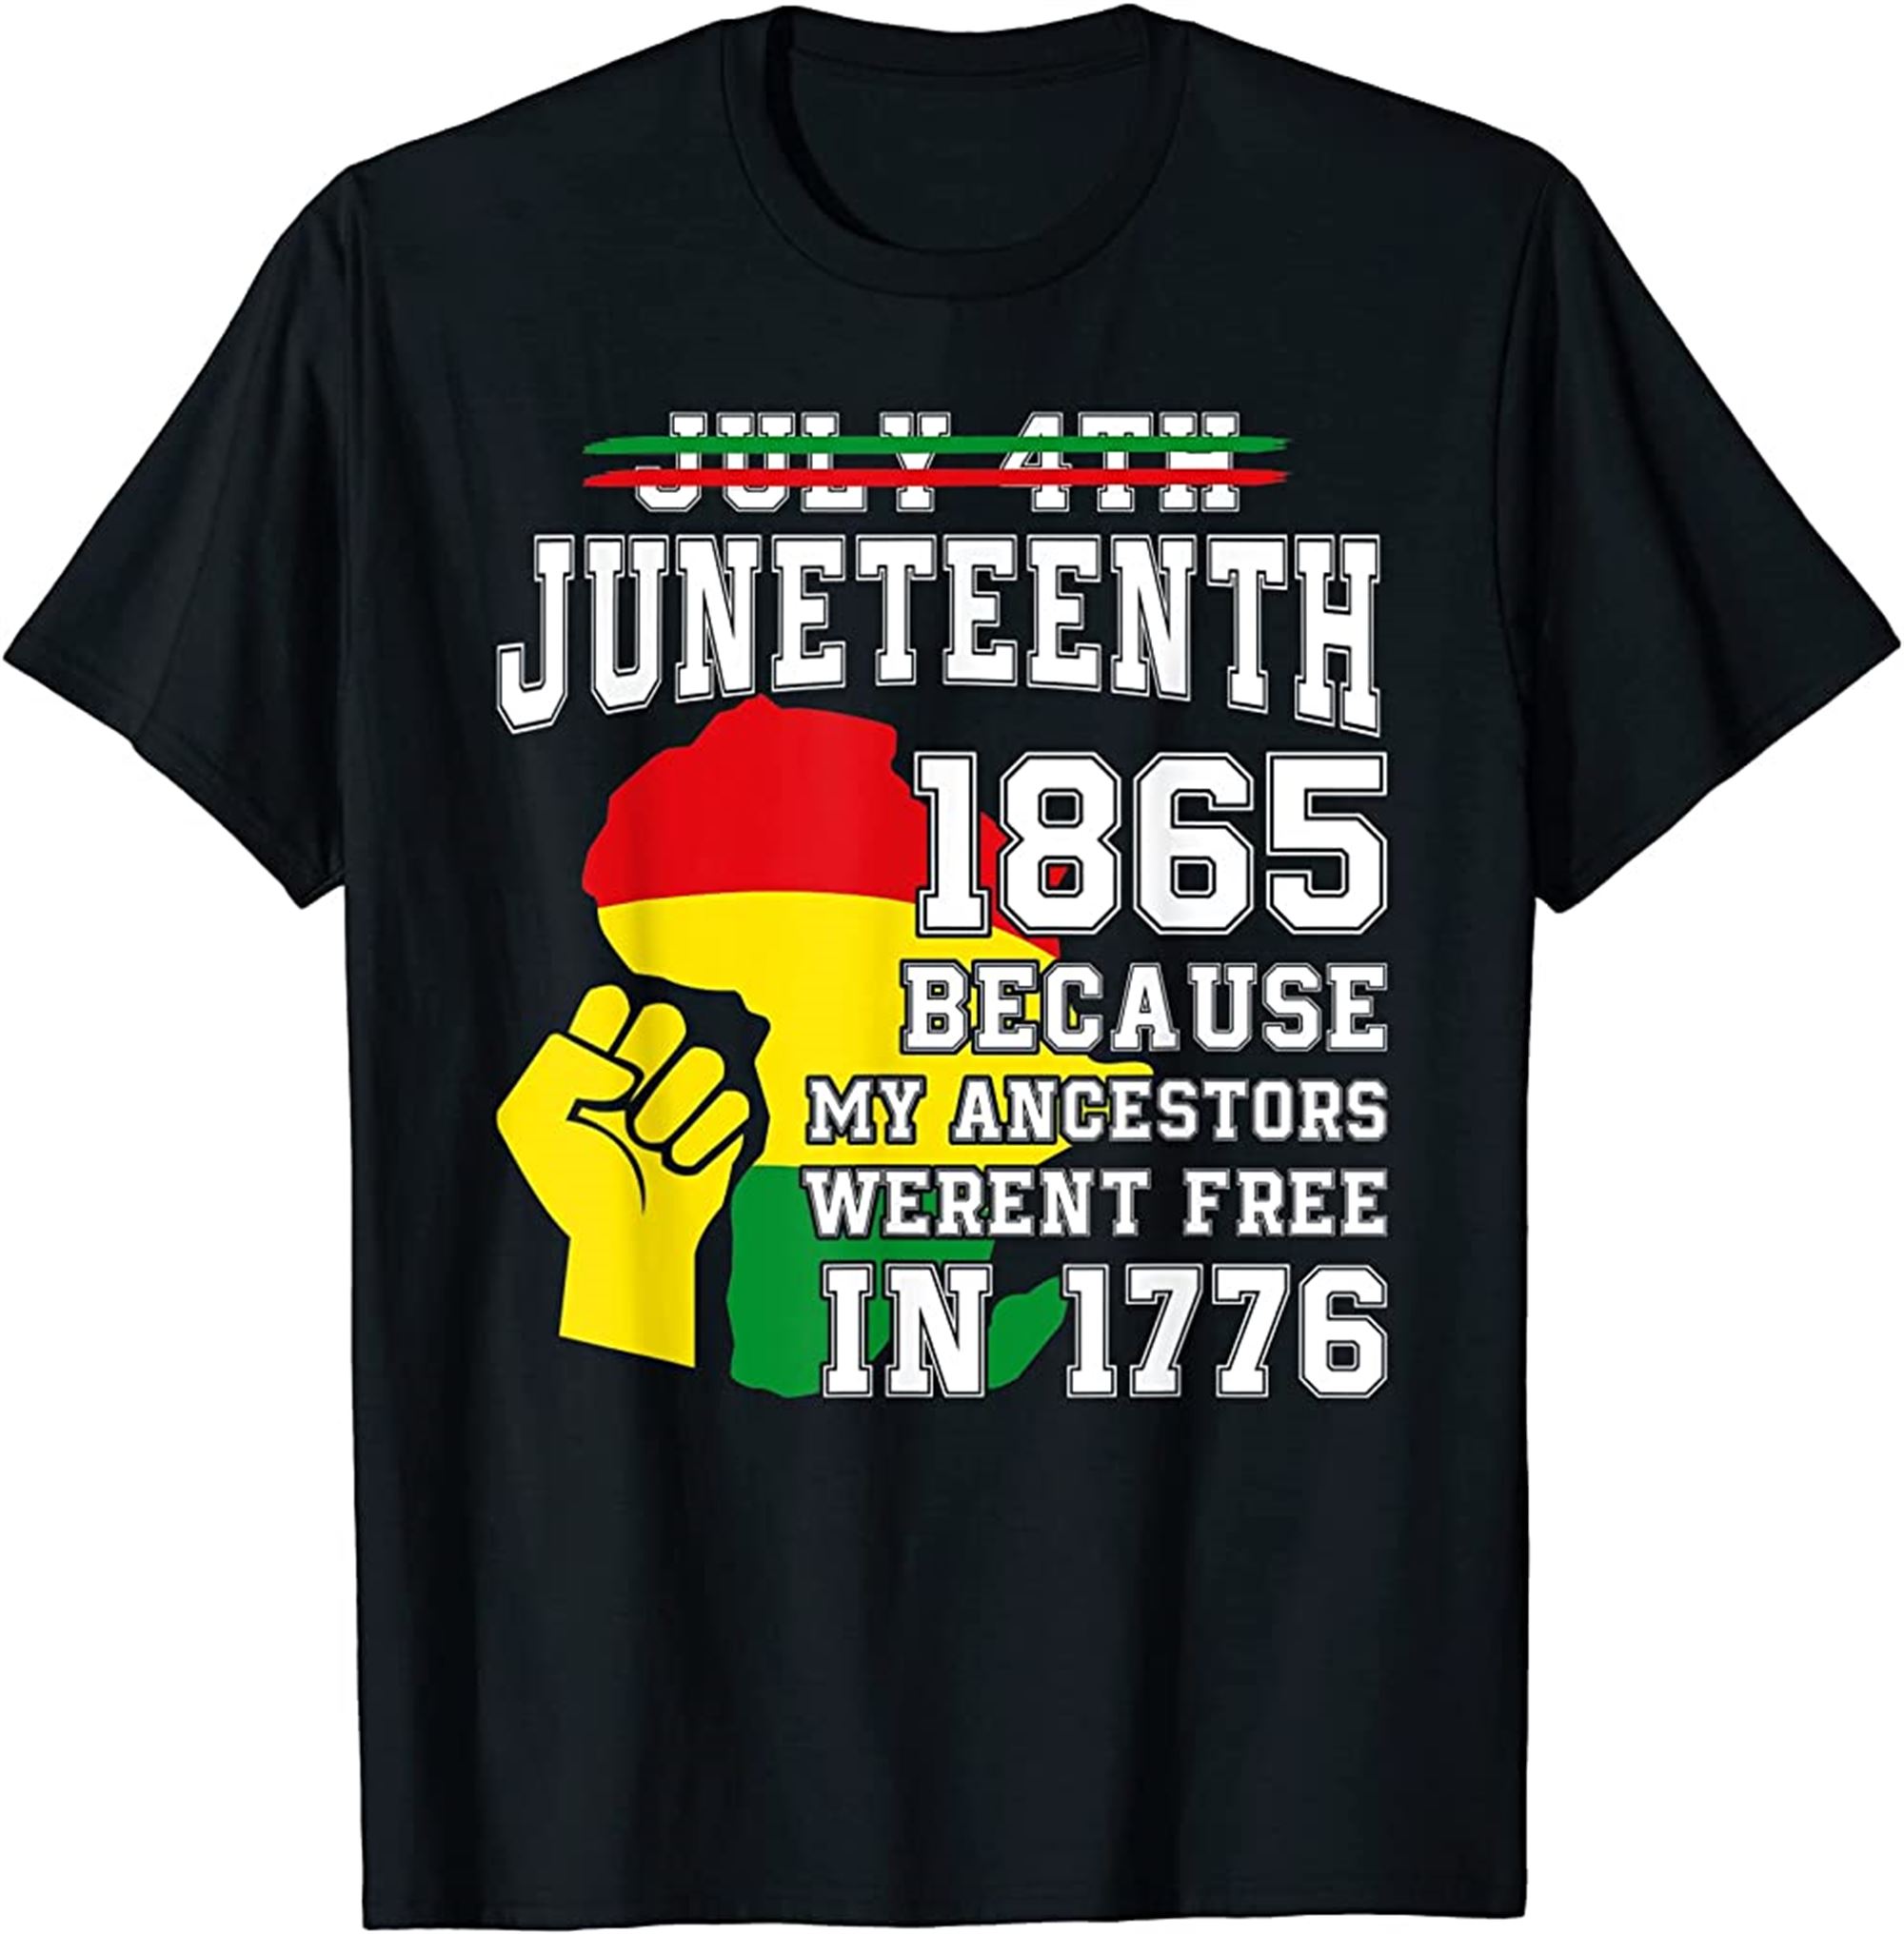 July 4th Juneteenth 1865 Because My Ancestors T-shirt Full Size Up To 5xl